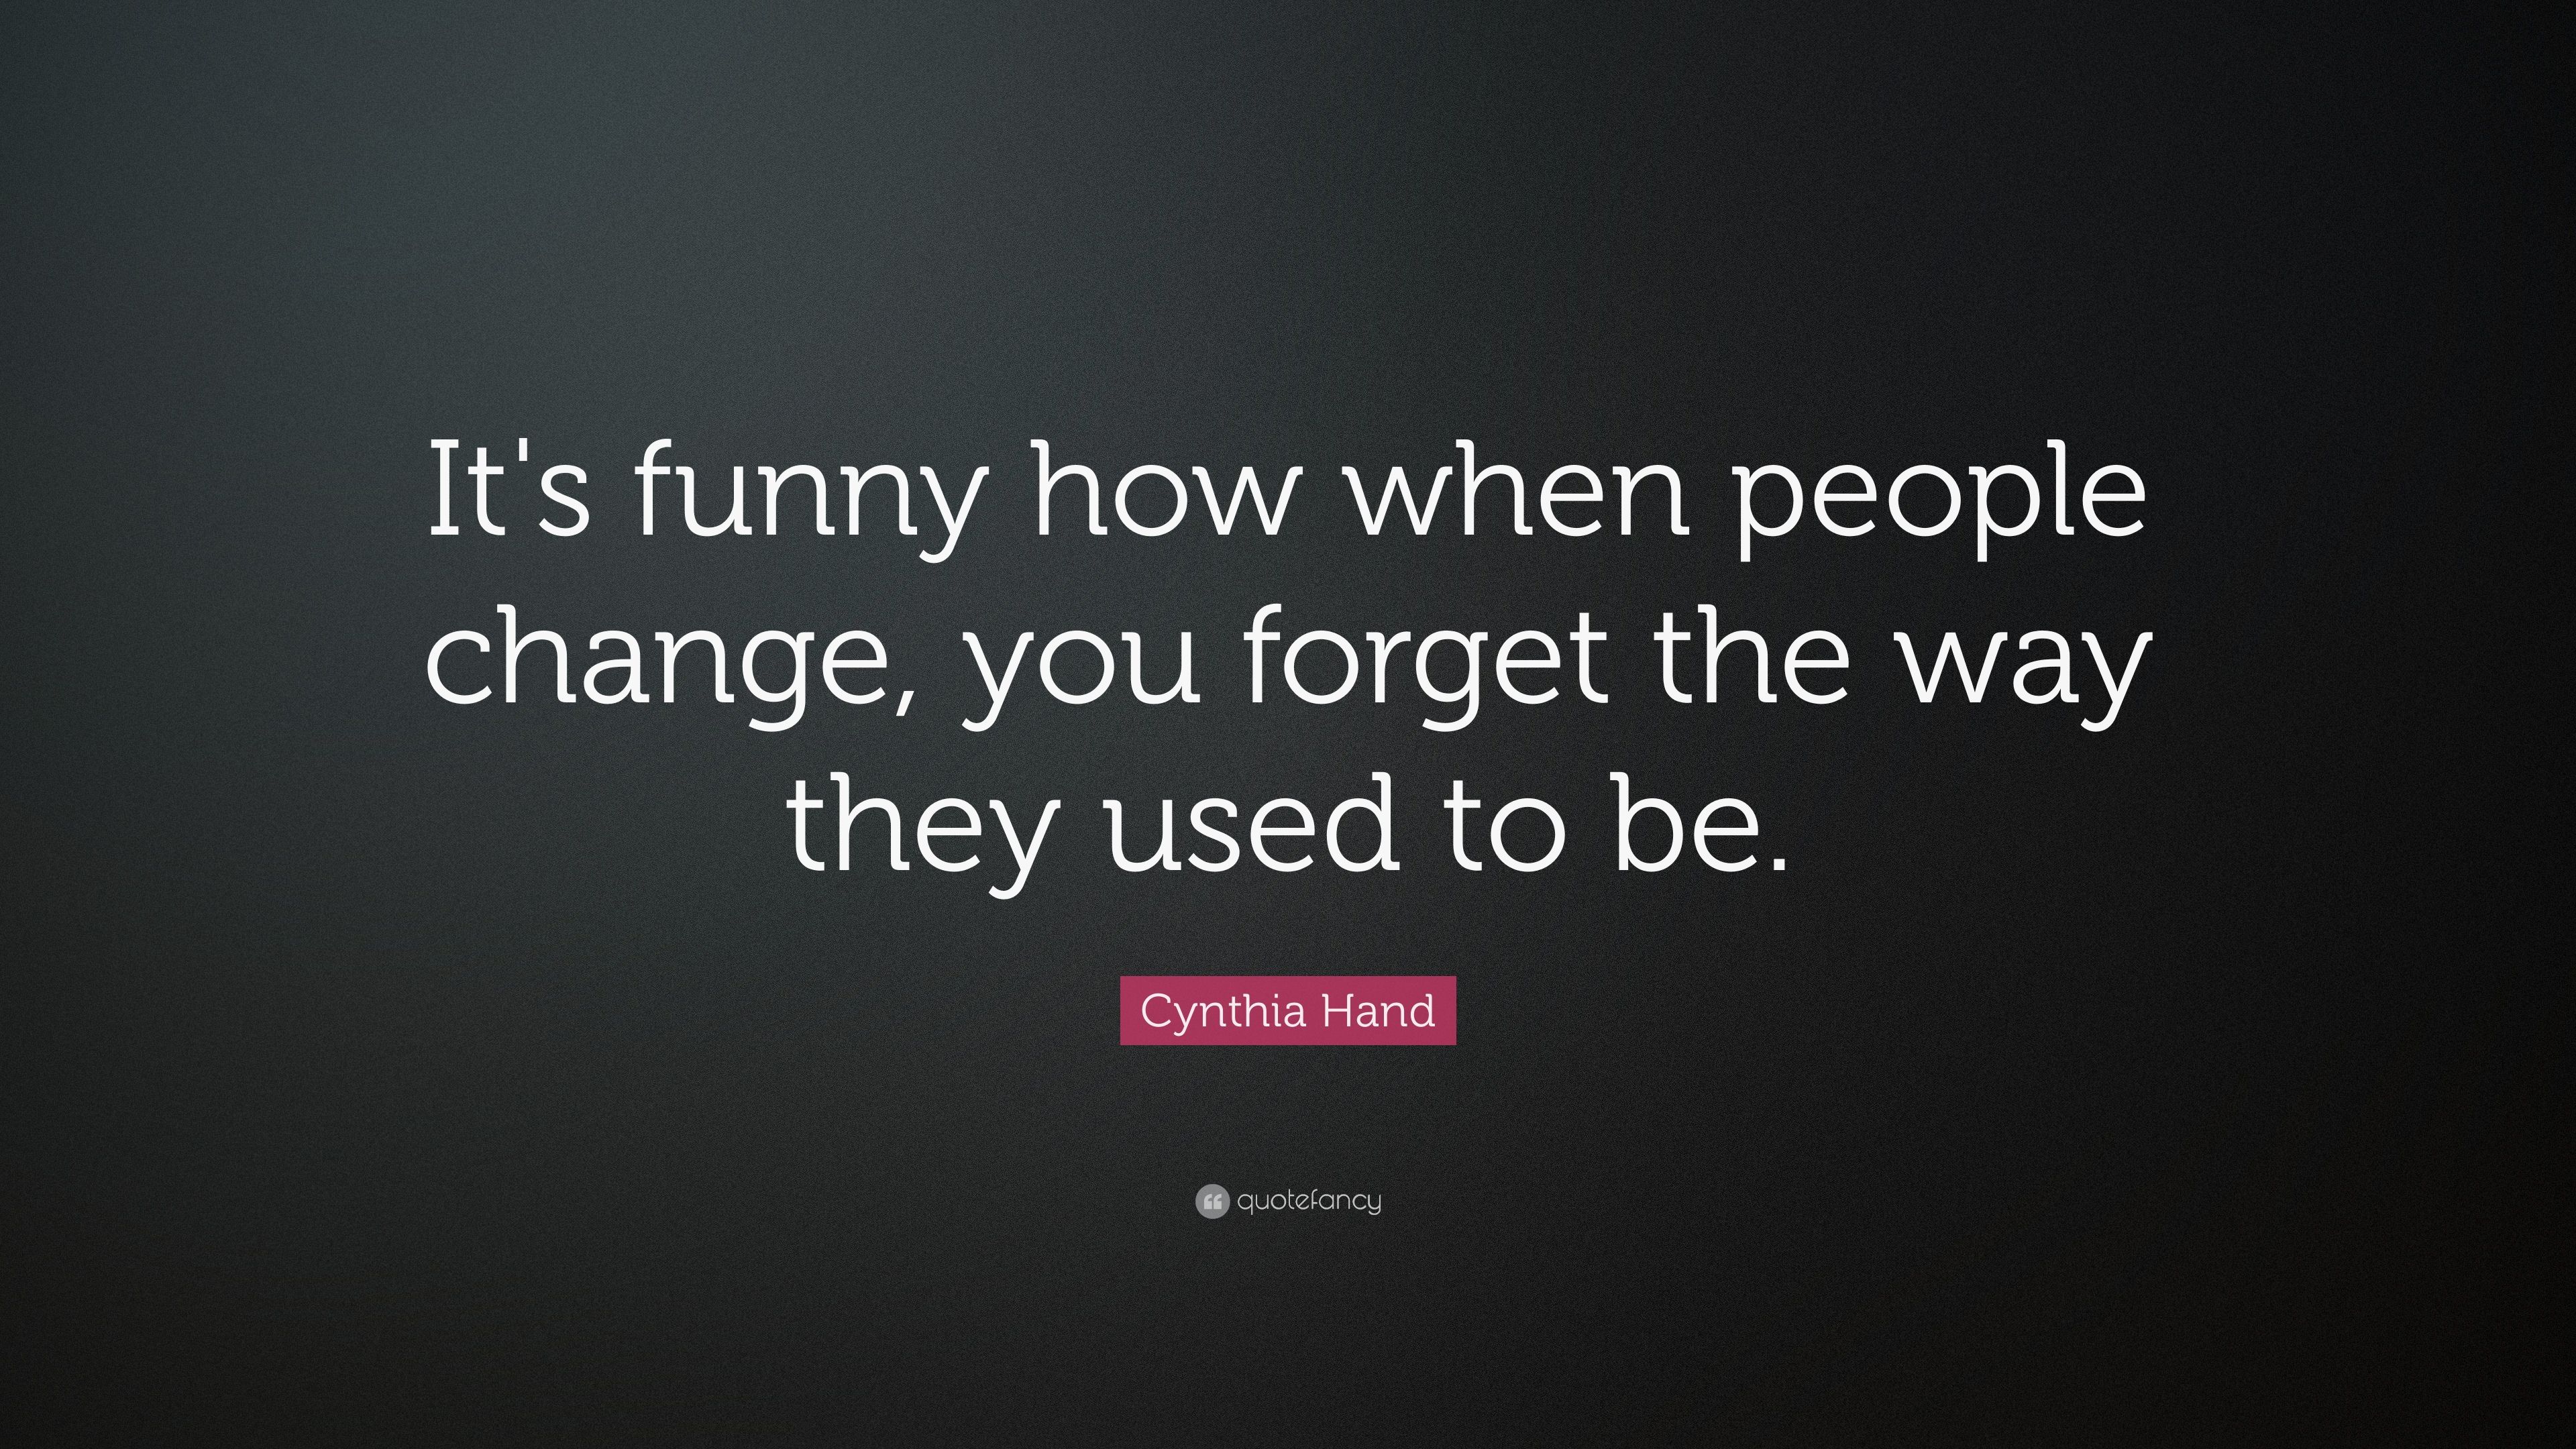 Cynthia Hand Quote: “It's funny how when people change, you forget